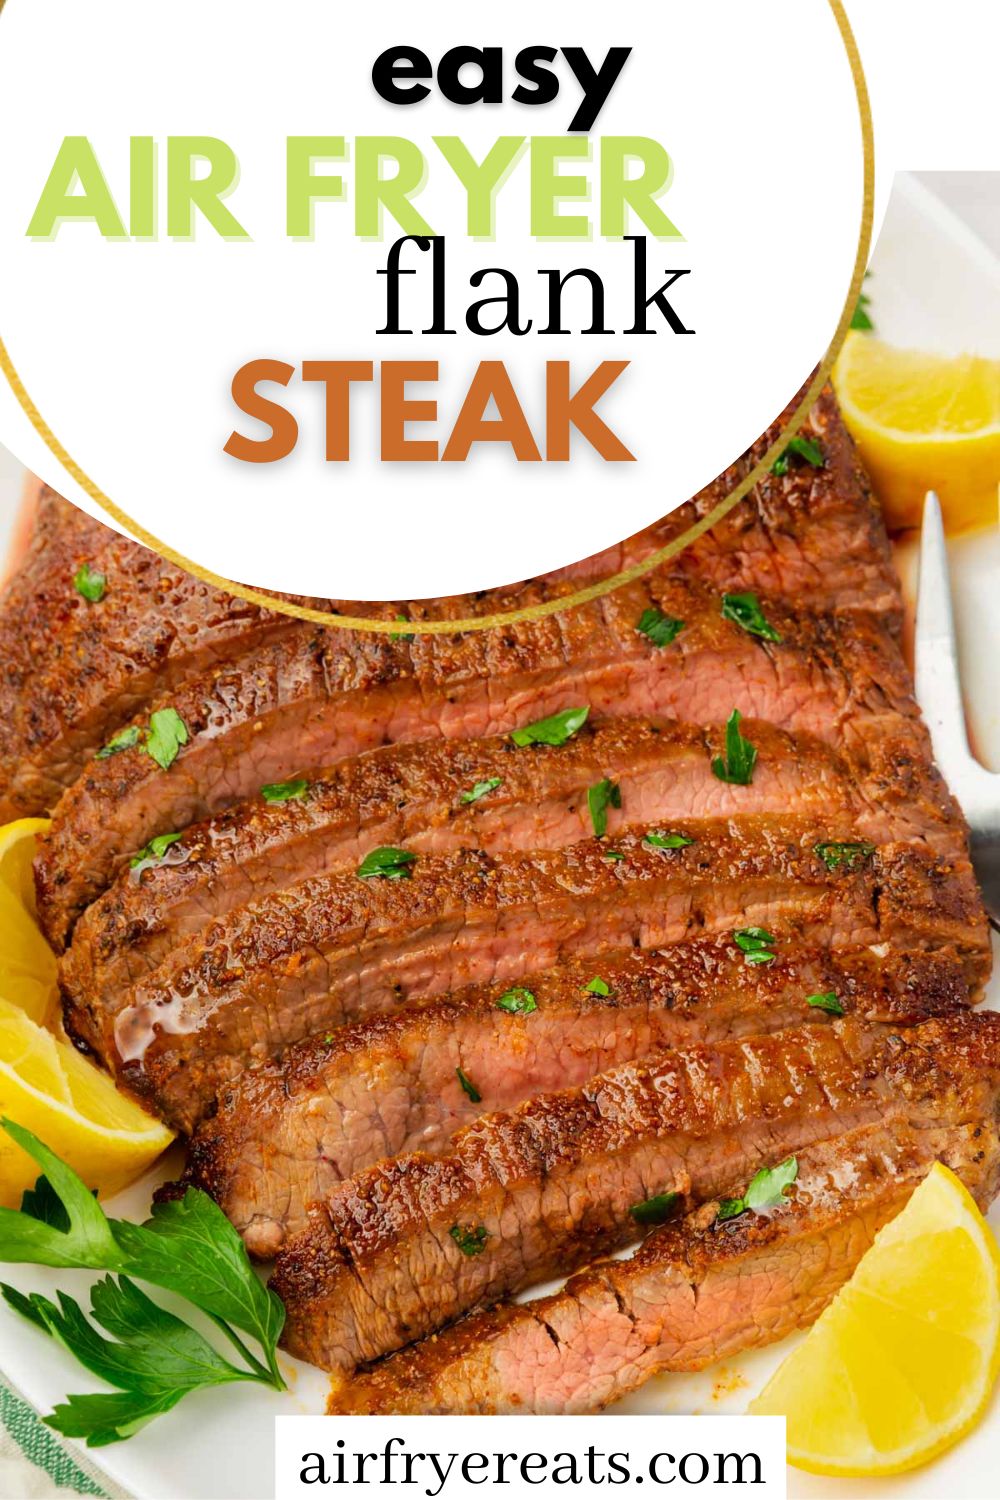 a large air fryer flank steak sliced, on a platter surrounded by lemon wedges. text at top of image says "easy air fryer flank steak" in black, green, and brown letters.